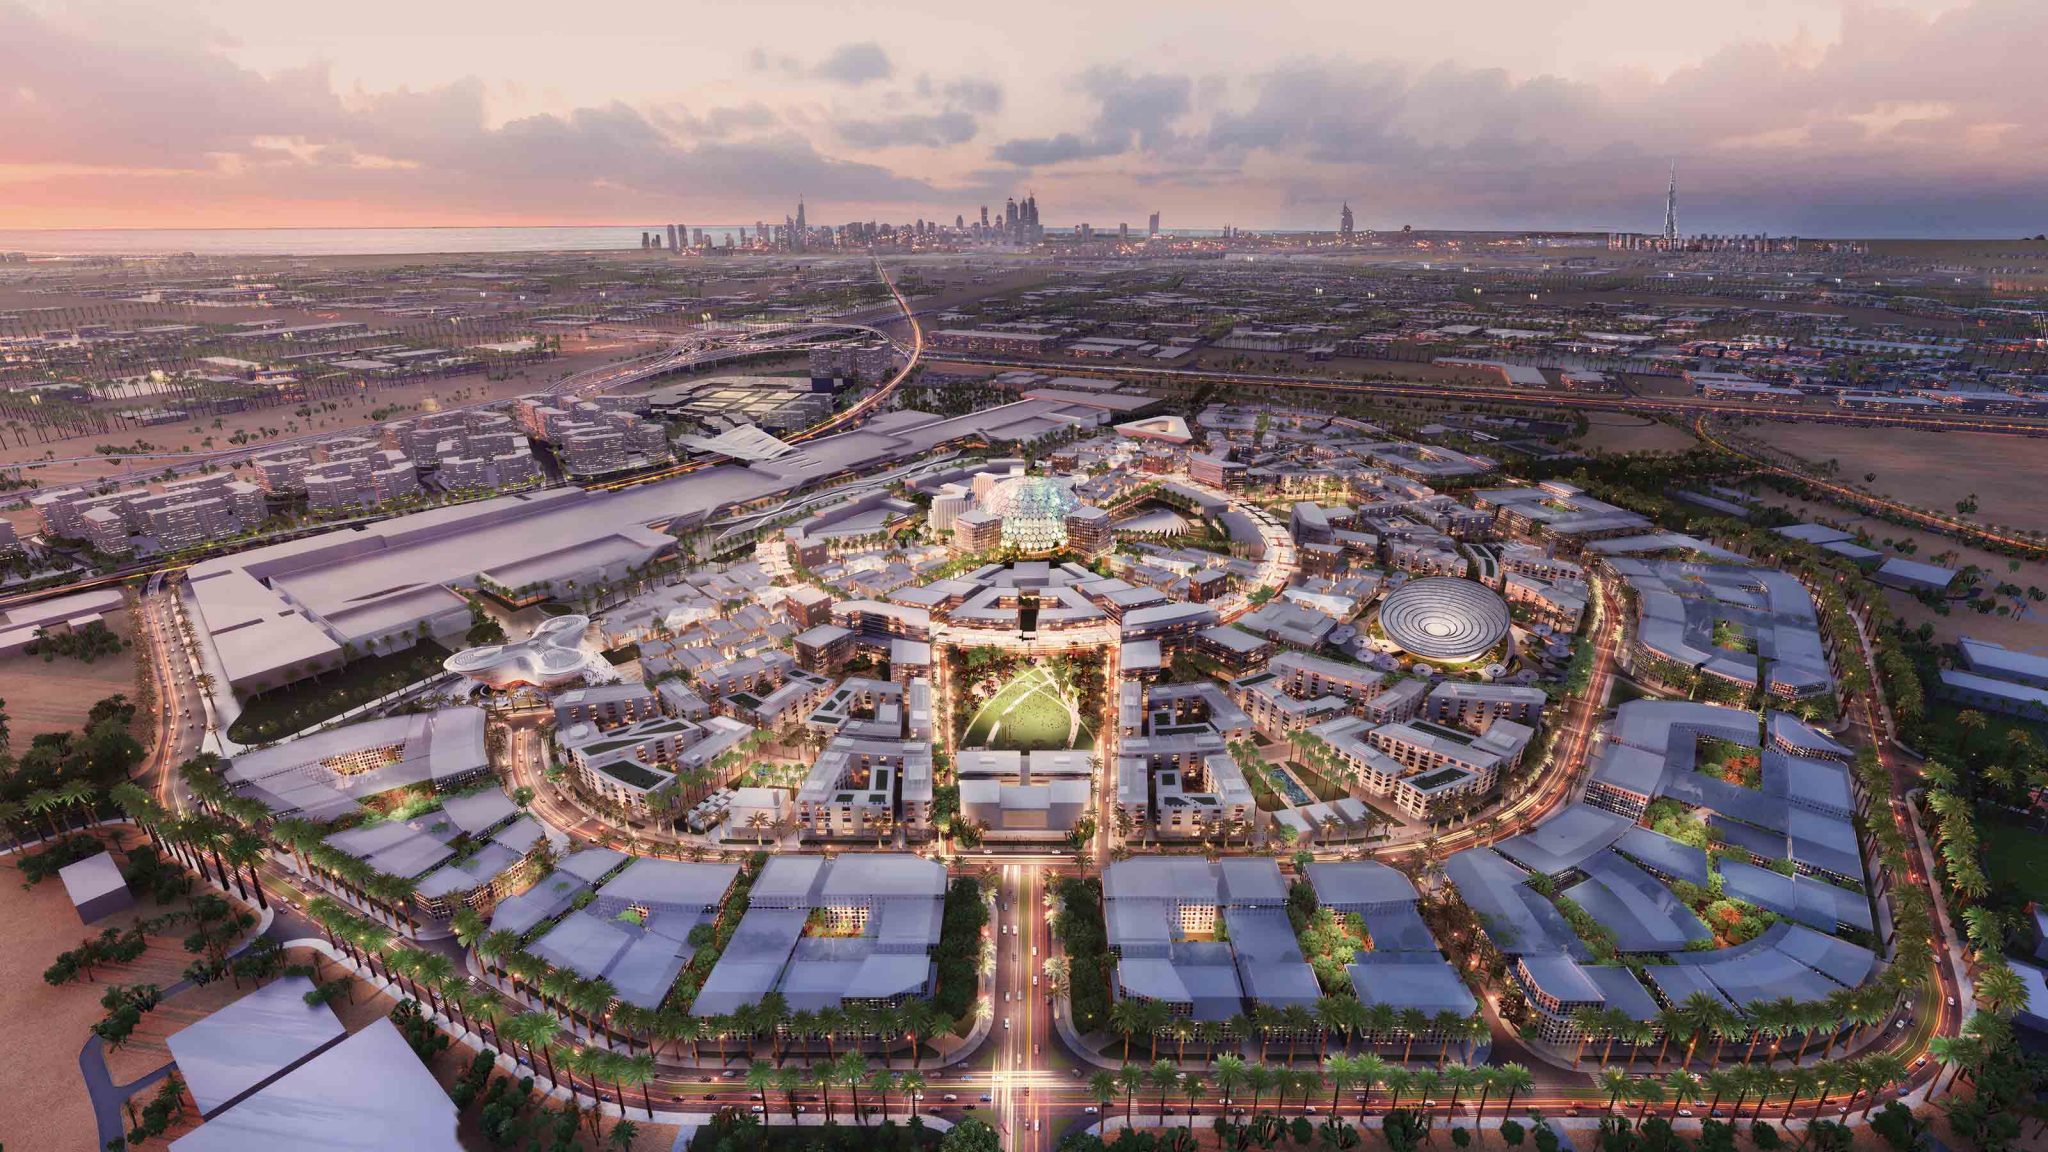 Dubai Expo 2020 to be held from October 1, 2021 to March 31, 2022